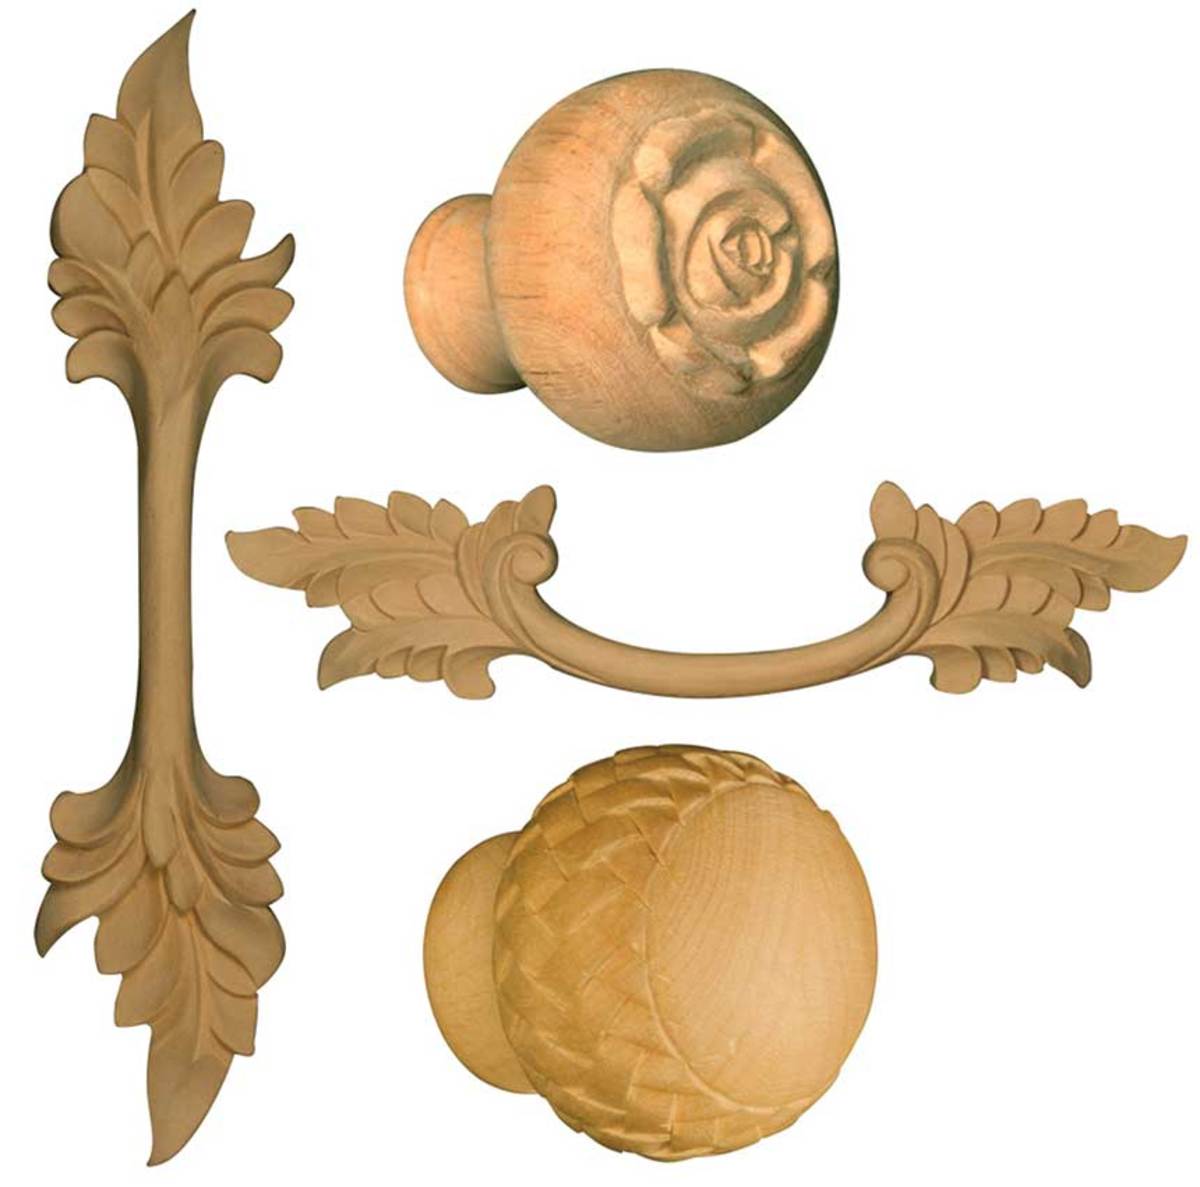 Decorative knobs and handles from Osborne.